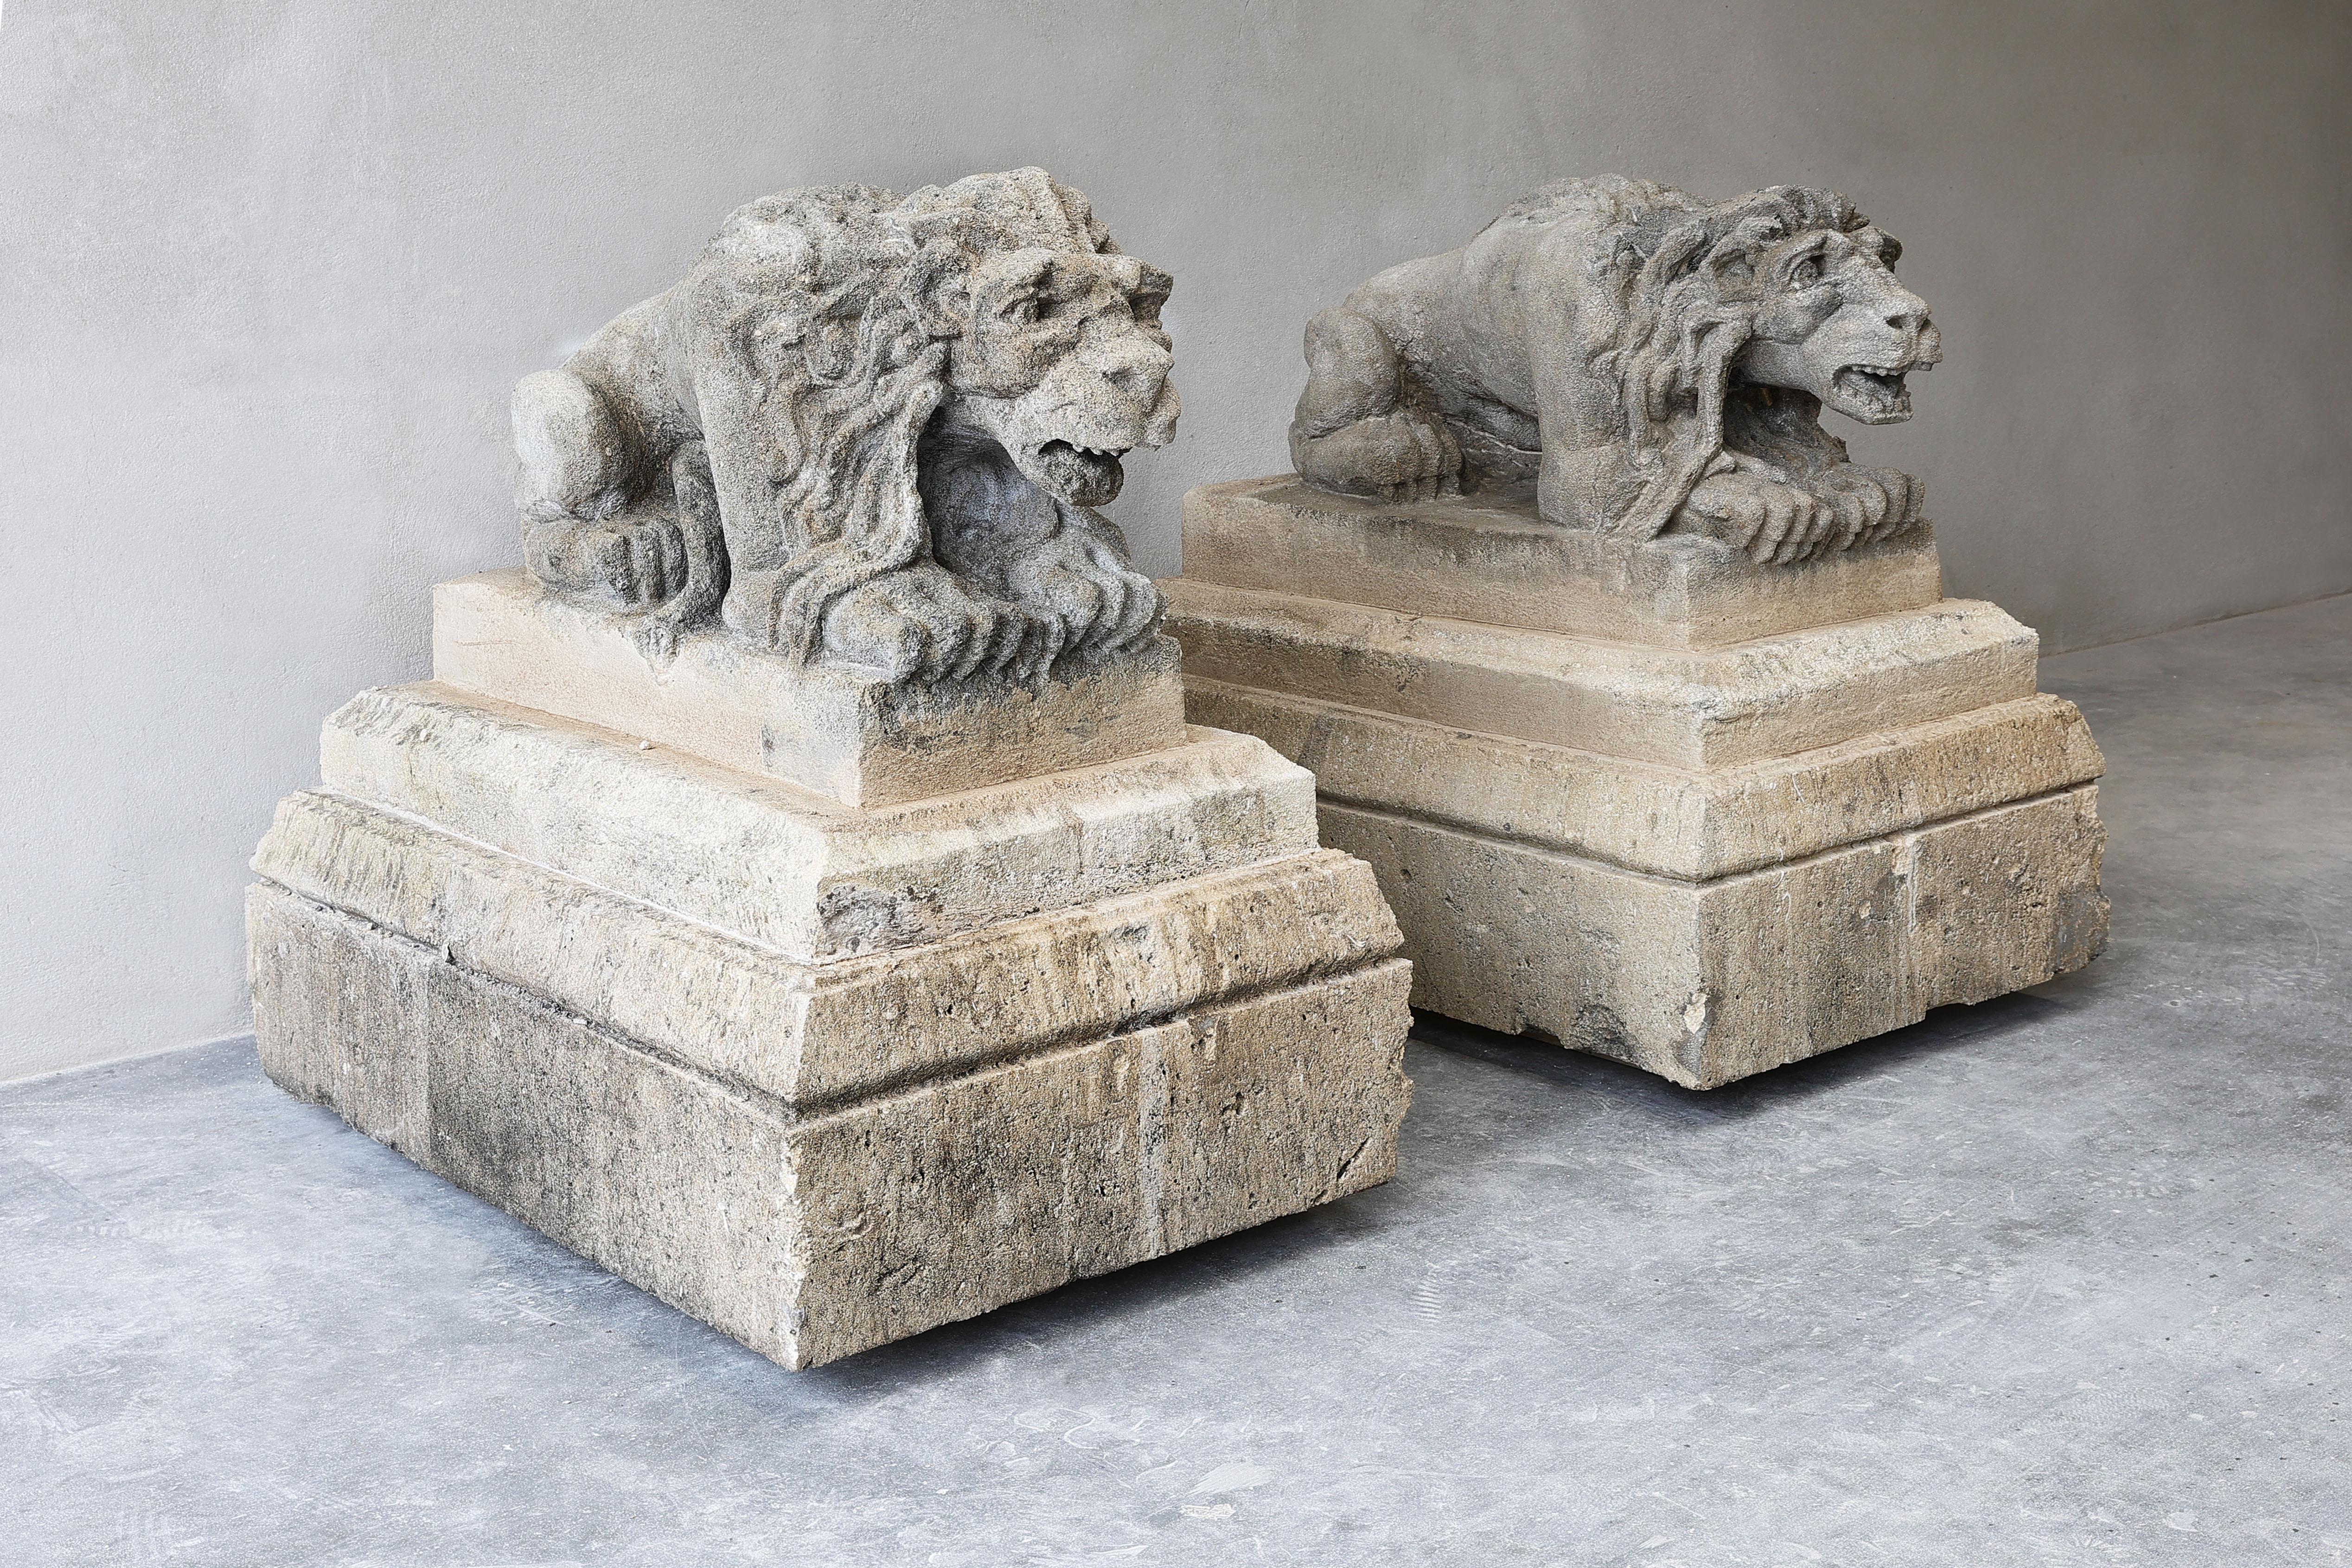 A very nice antique set of two lions on a pedestal of French limestone. These statues are dated from the 19th century.